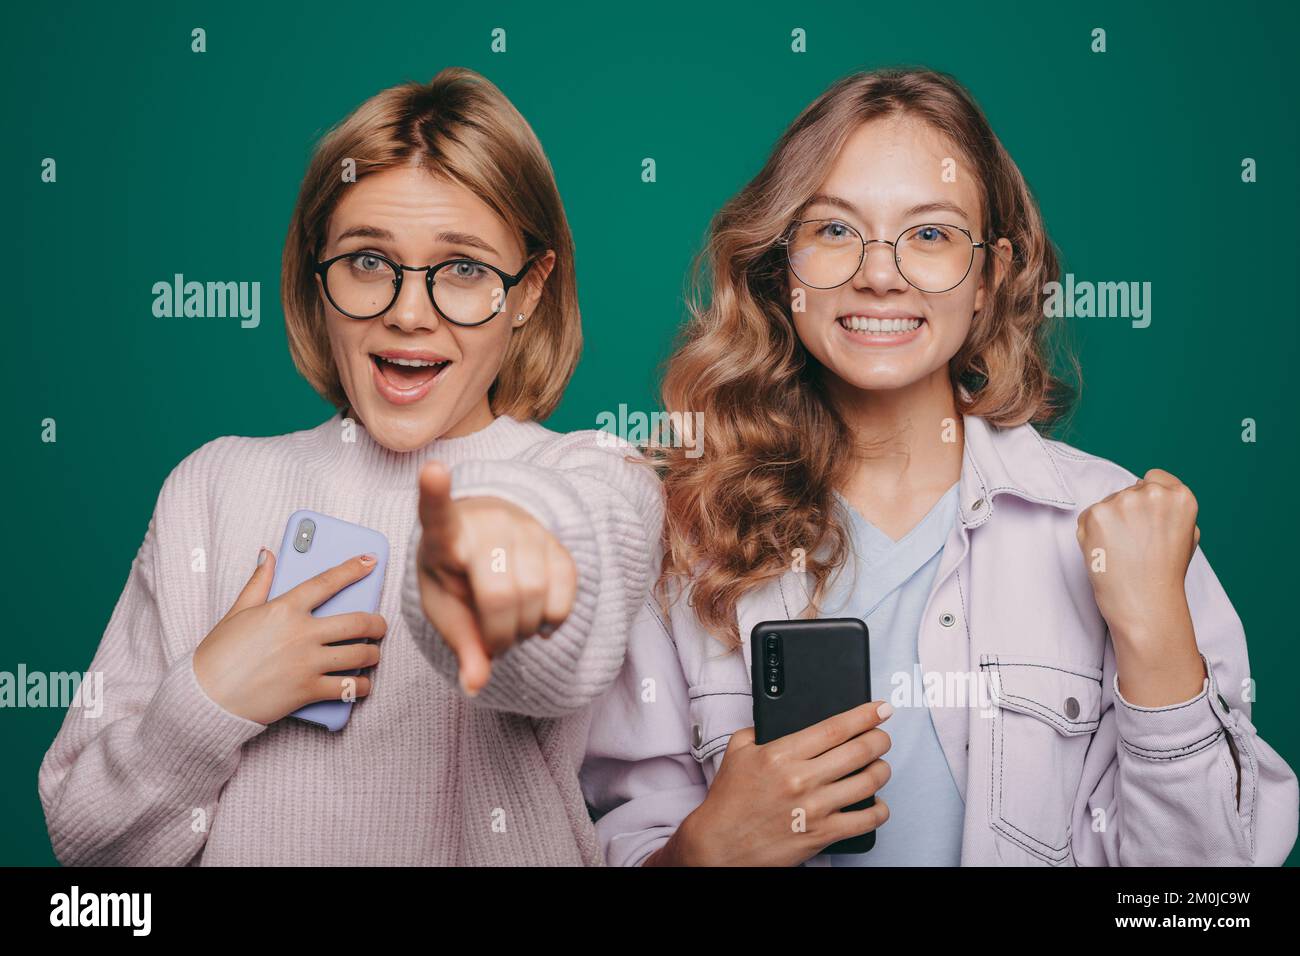 Two satisfied young women friends using mobile cell phone isolated on green background studio portrait. Isolated portrait. Excited cheerful. Stock Photo